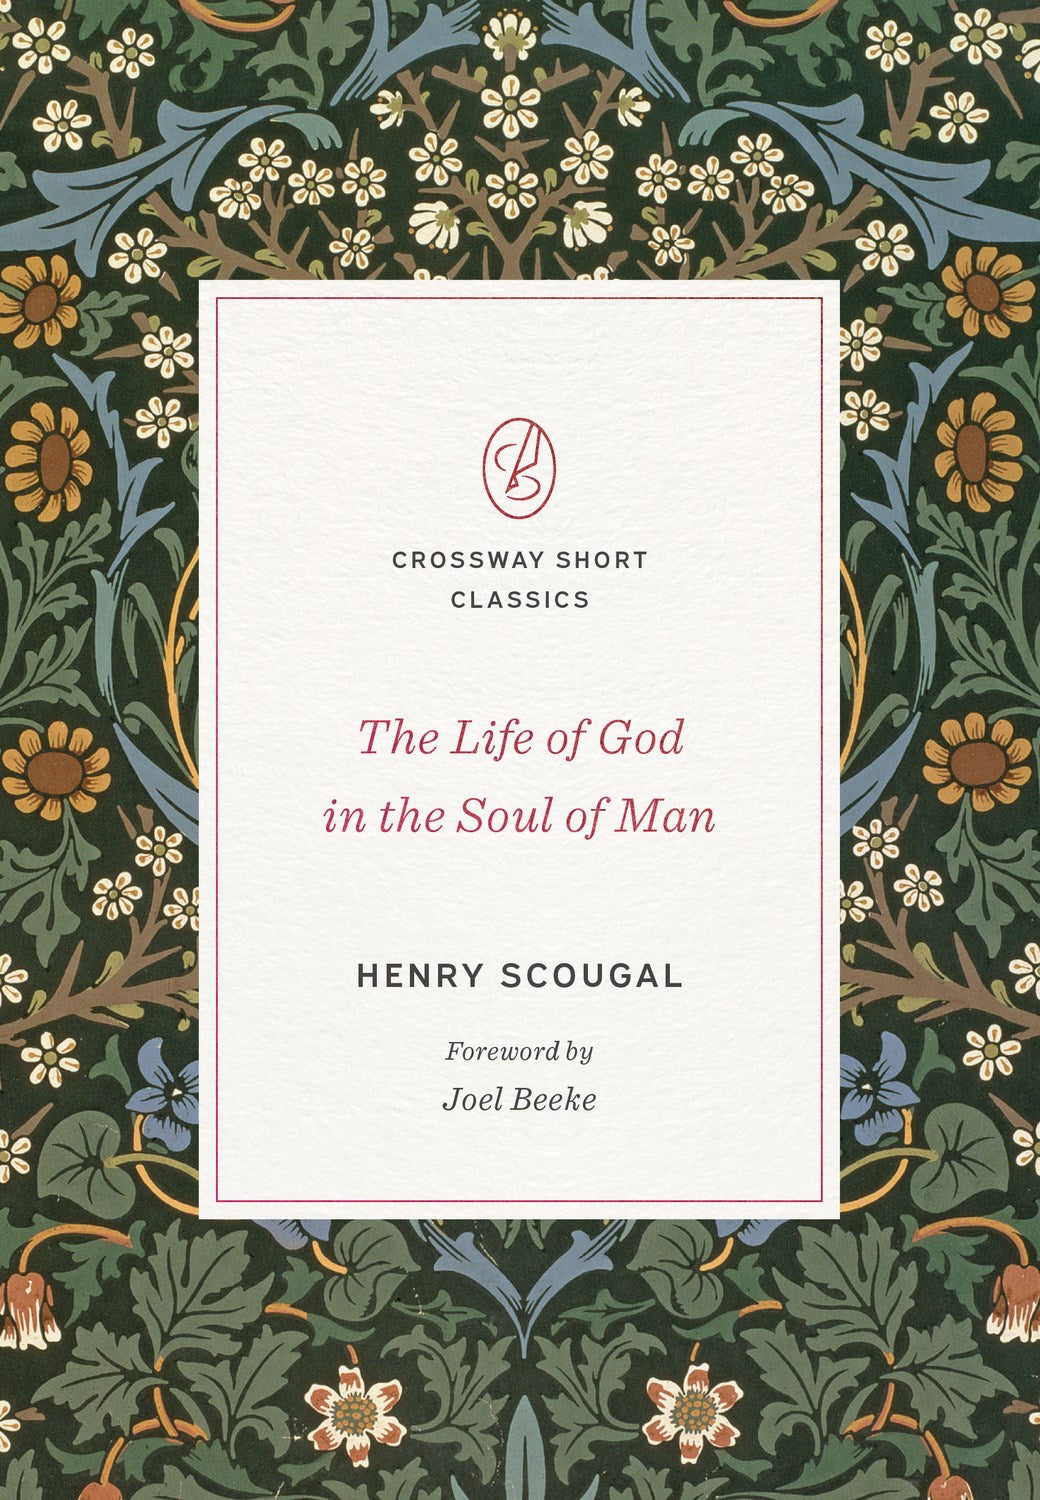 The Life Of God In The Soul Of Man (Crossway Short Classics)